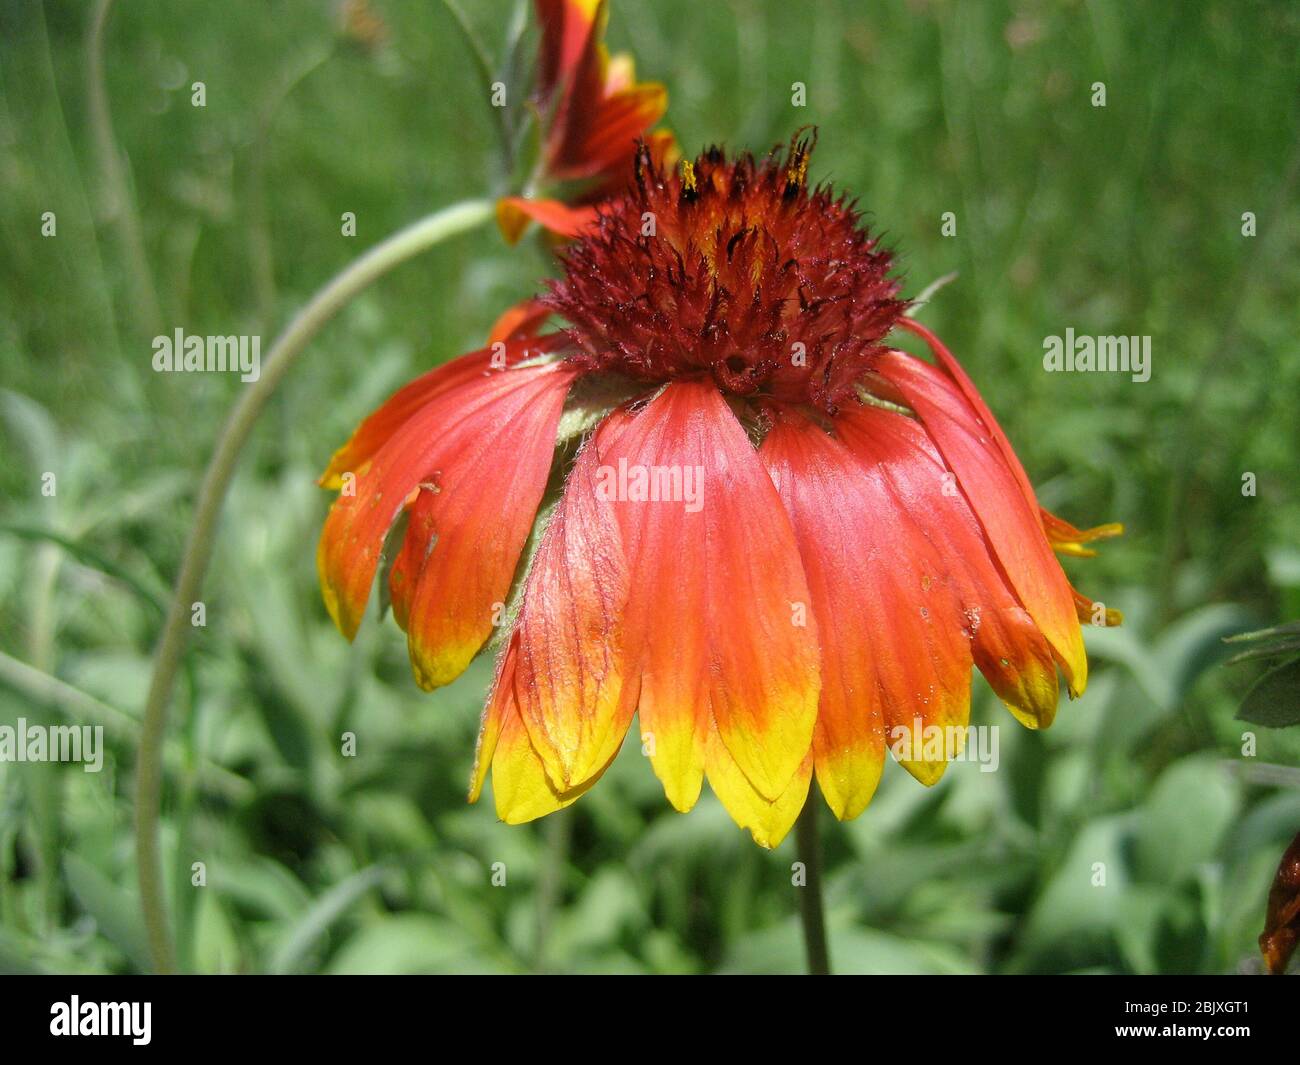 A close-up of an orange, yellow and red firewheel flower grows in a meadow in Northern Arizona. Stock Photo